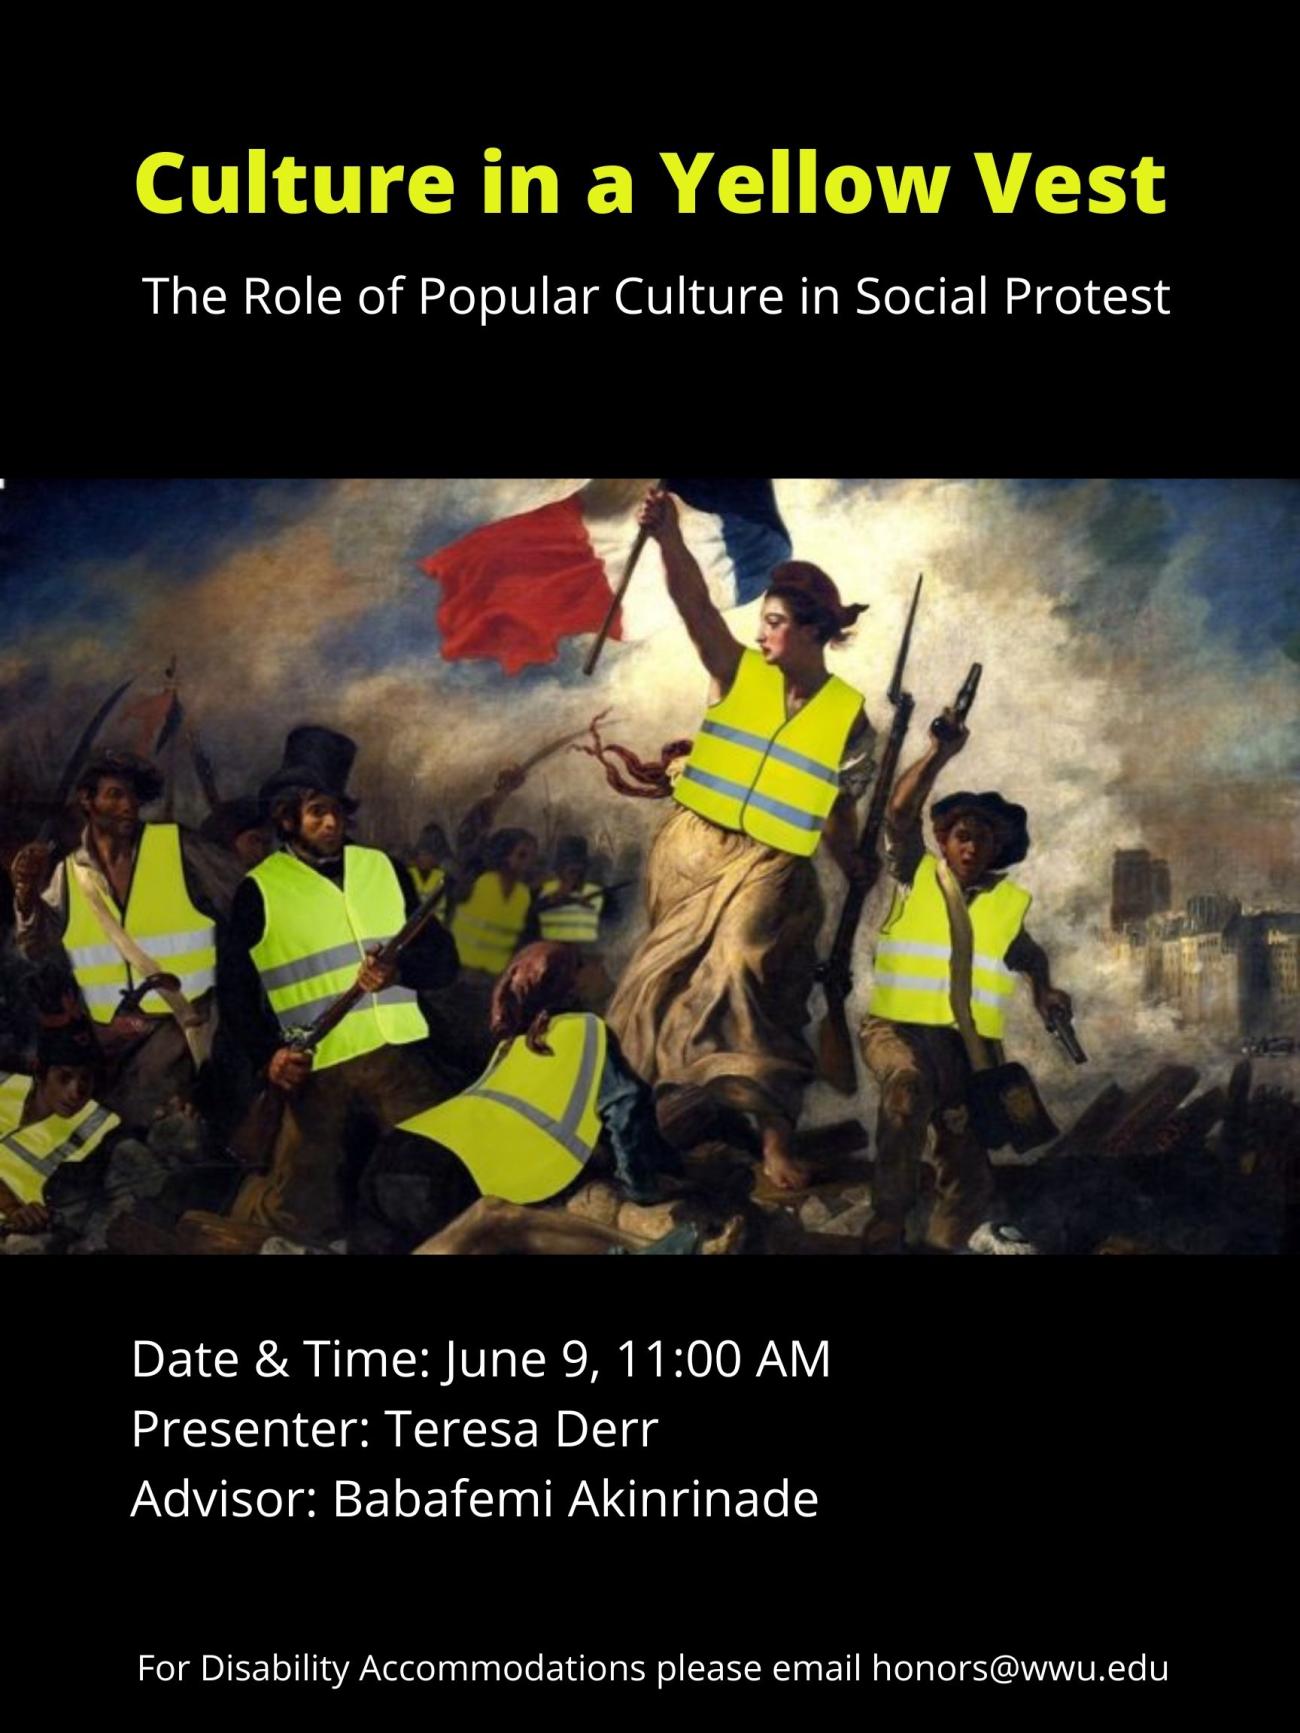 Image: famous French painting "Liberty Guides the People" depicts a women holding a flag in one hand and a gun in the other, leading a crowd of armed people to fight. Neon yellow road vests have been photoshopped onto the people to represent the modern Yellow Vest Protests. Text: "Culture in a Yellow Vest: The Role of Popular Culture in Social Protest. Date & Time: June 9, 11:00 AM. Presenter: Teresa Derr. Advisor: Babafemi Akinrinade. For Disability Accommodations please email honors@wwu.edu."